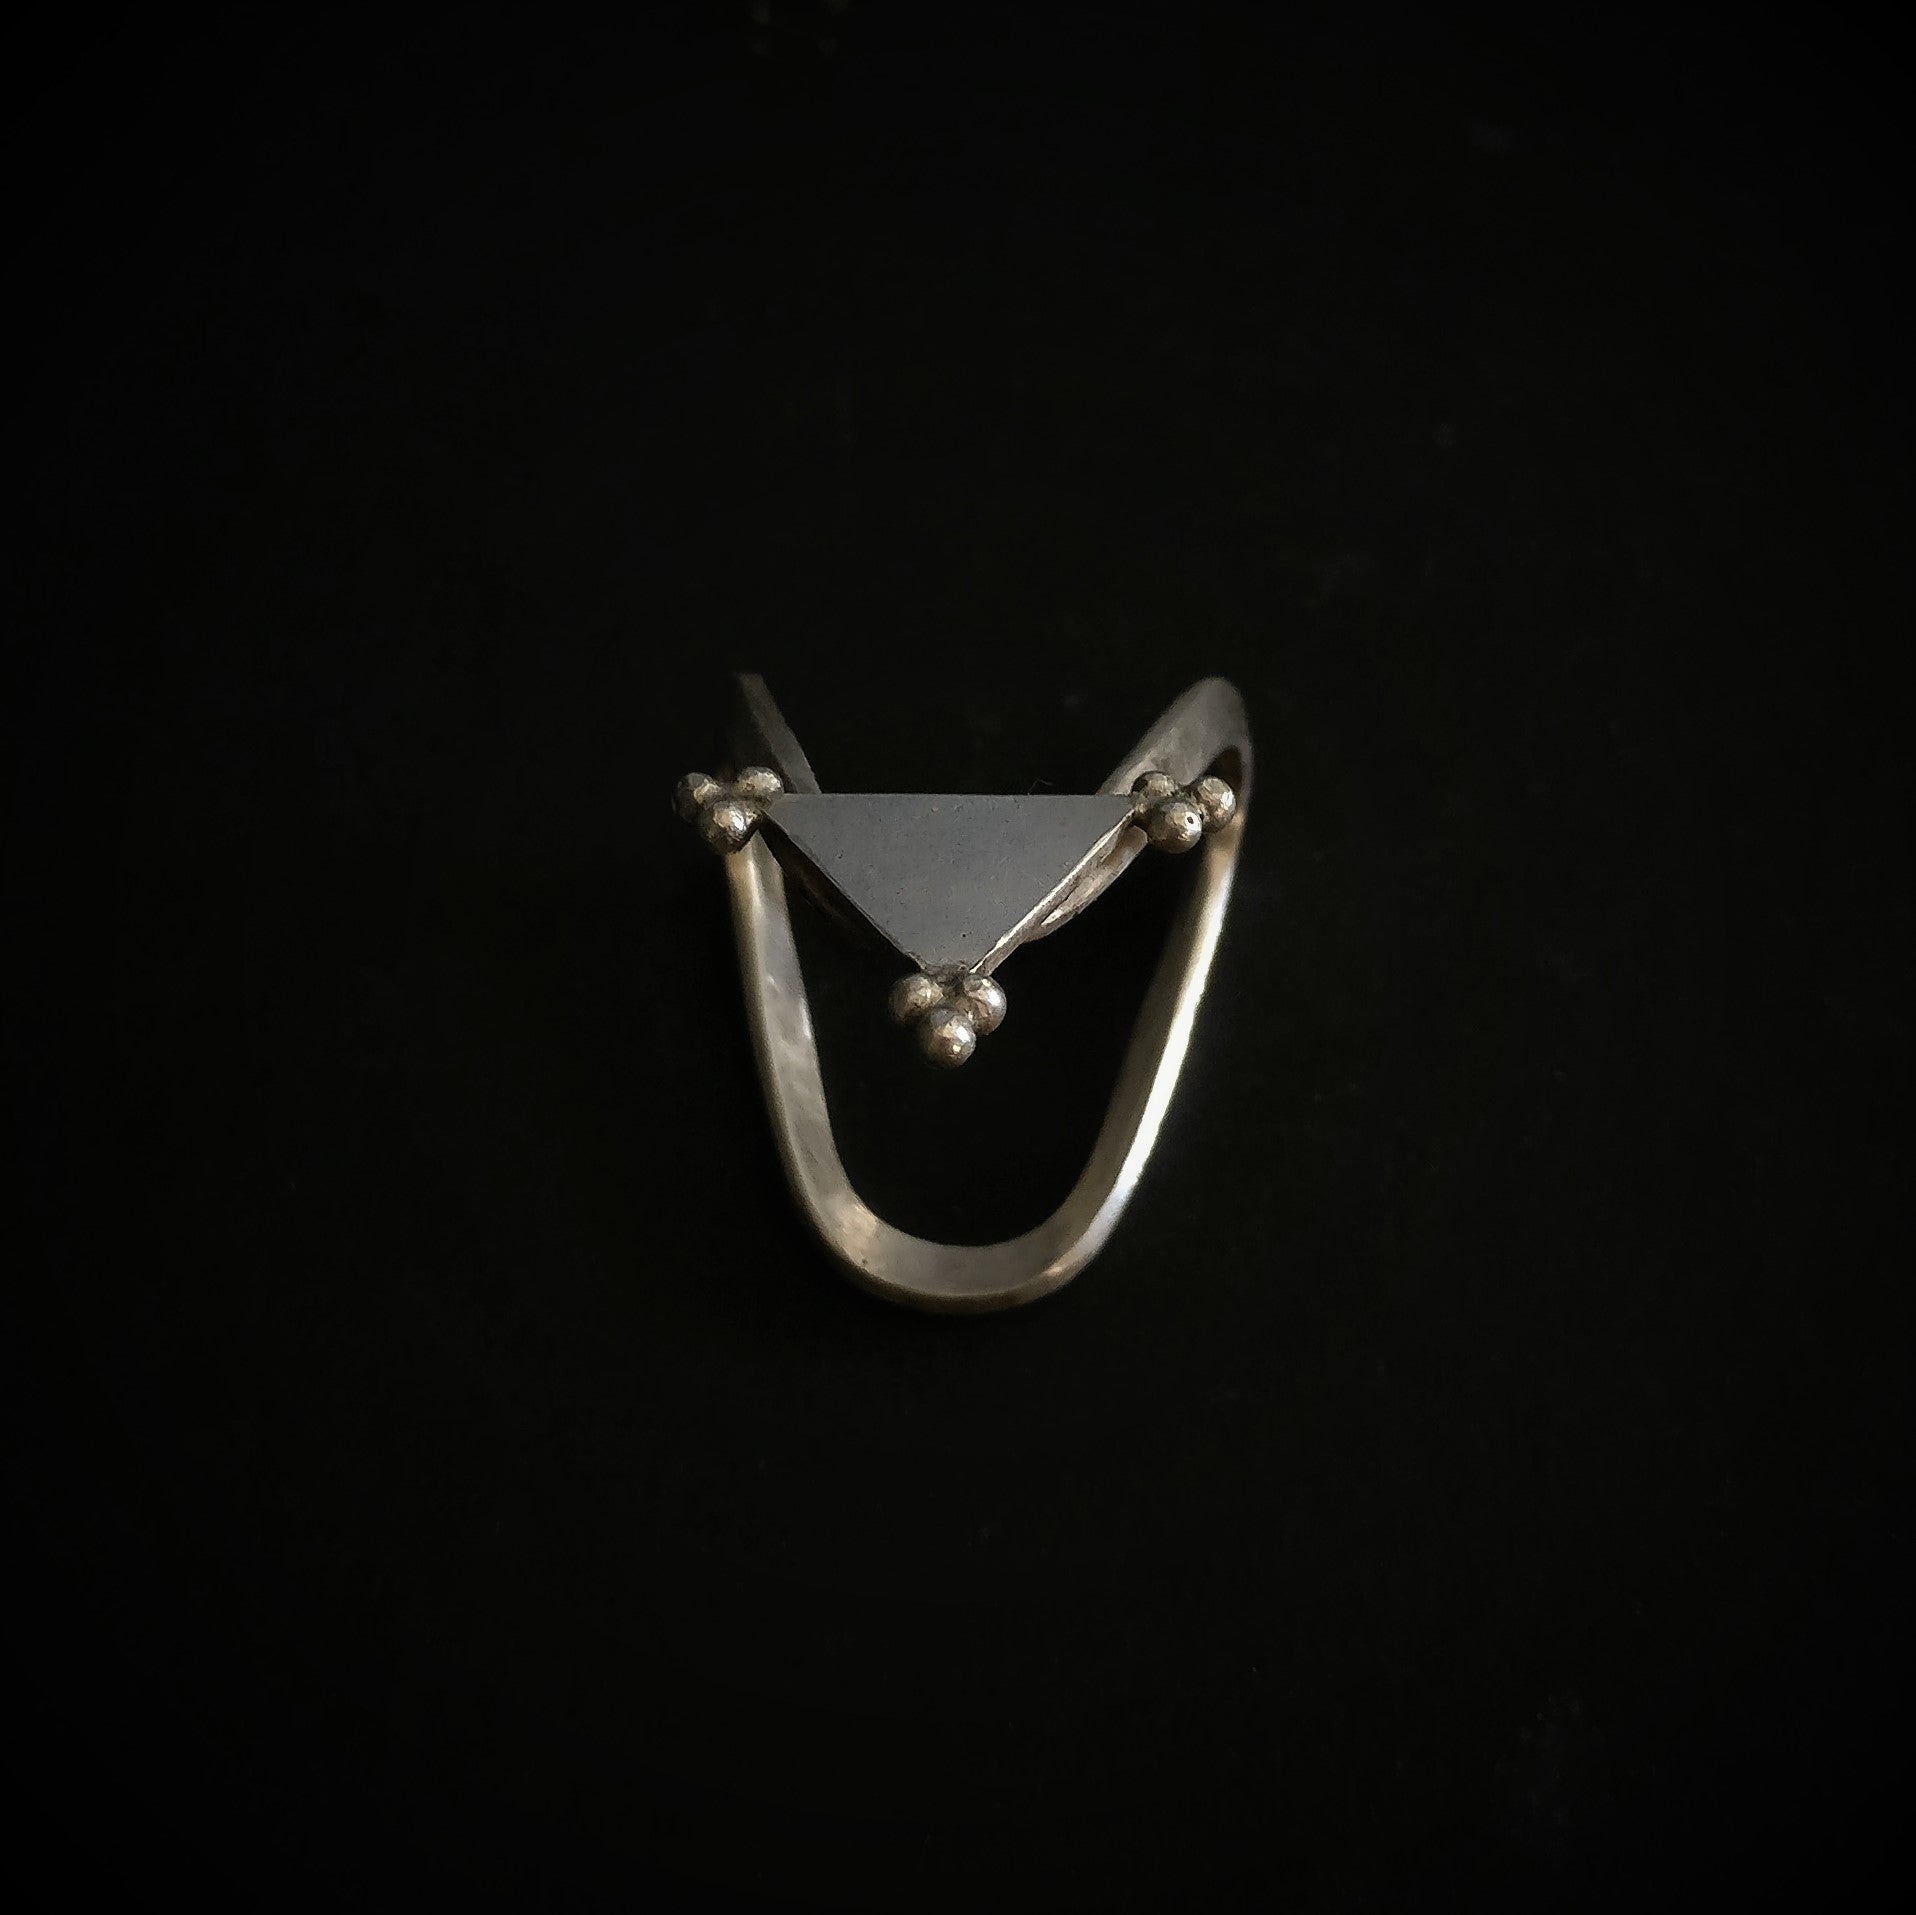 Buy Indian Silver Toe Ring online from Quirksmith